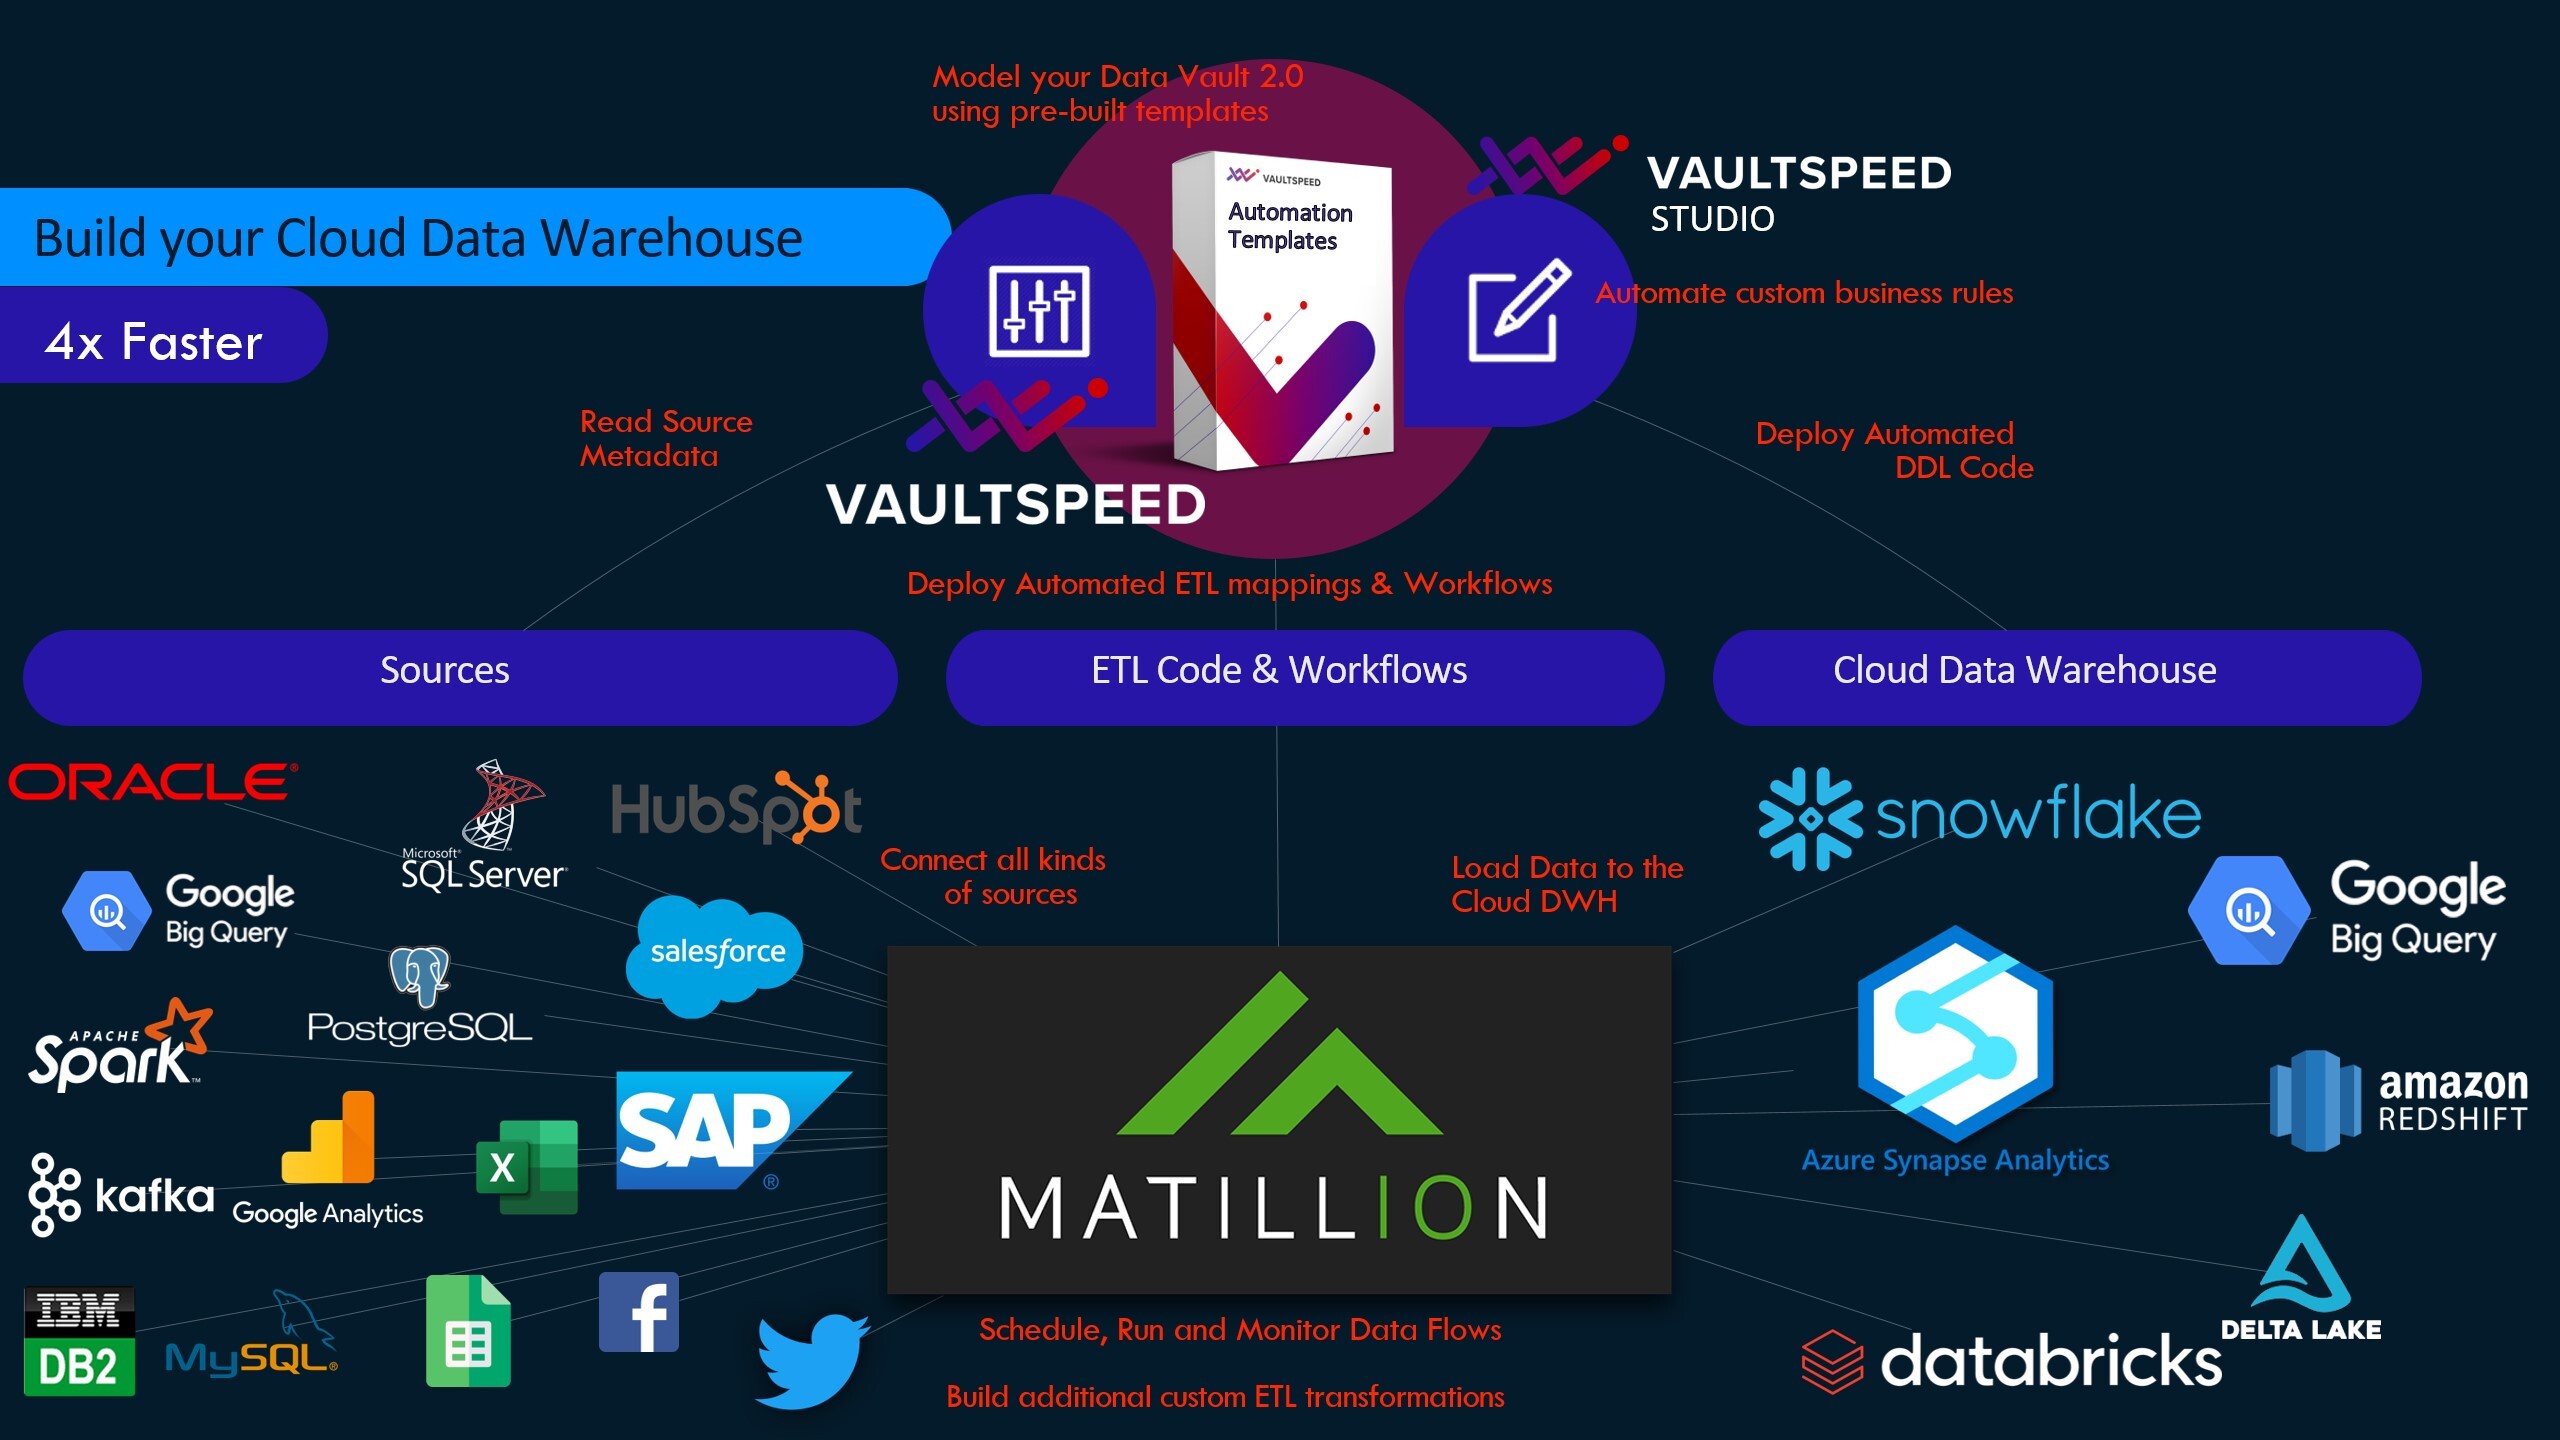 We already use Matillion for our ETL Does subscribing to Vault Speed mean its a lost investment 1